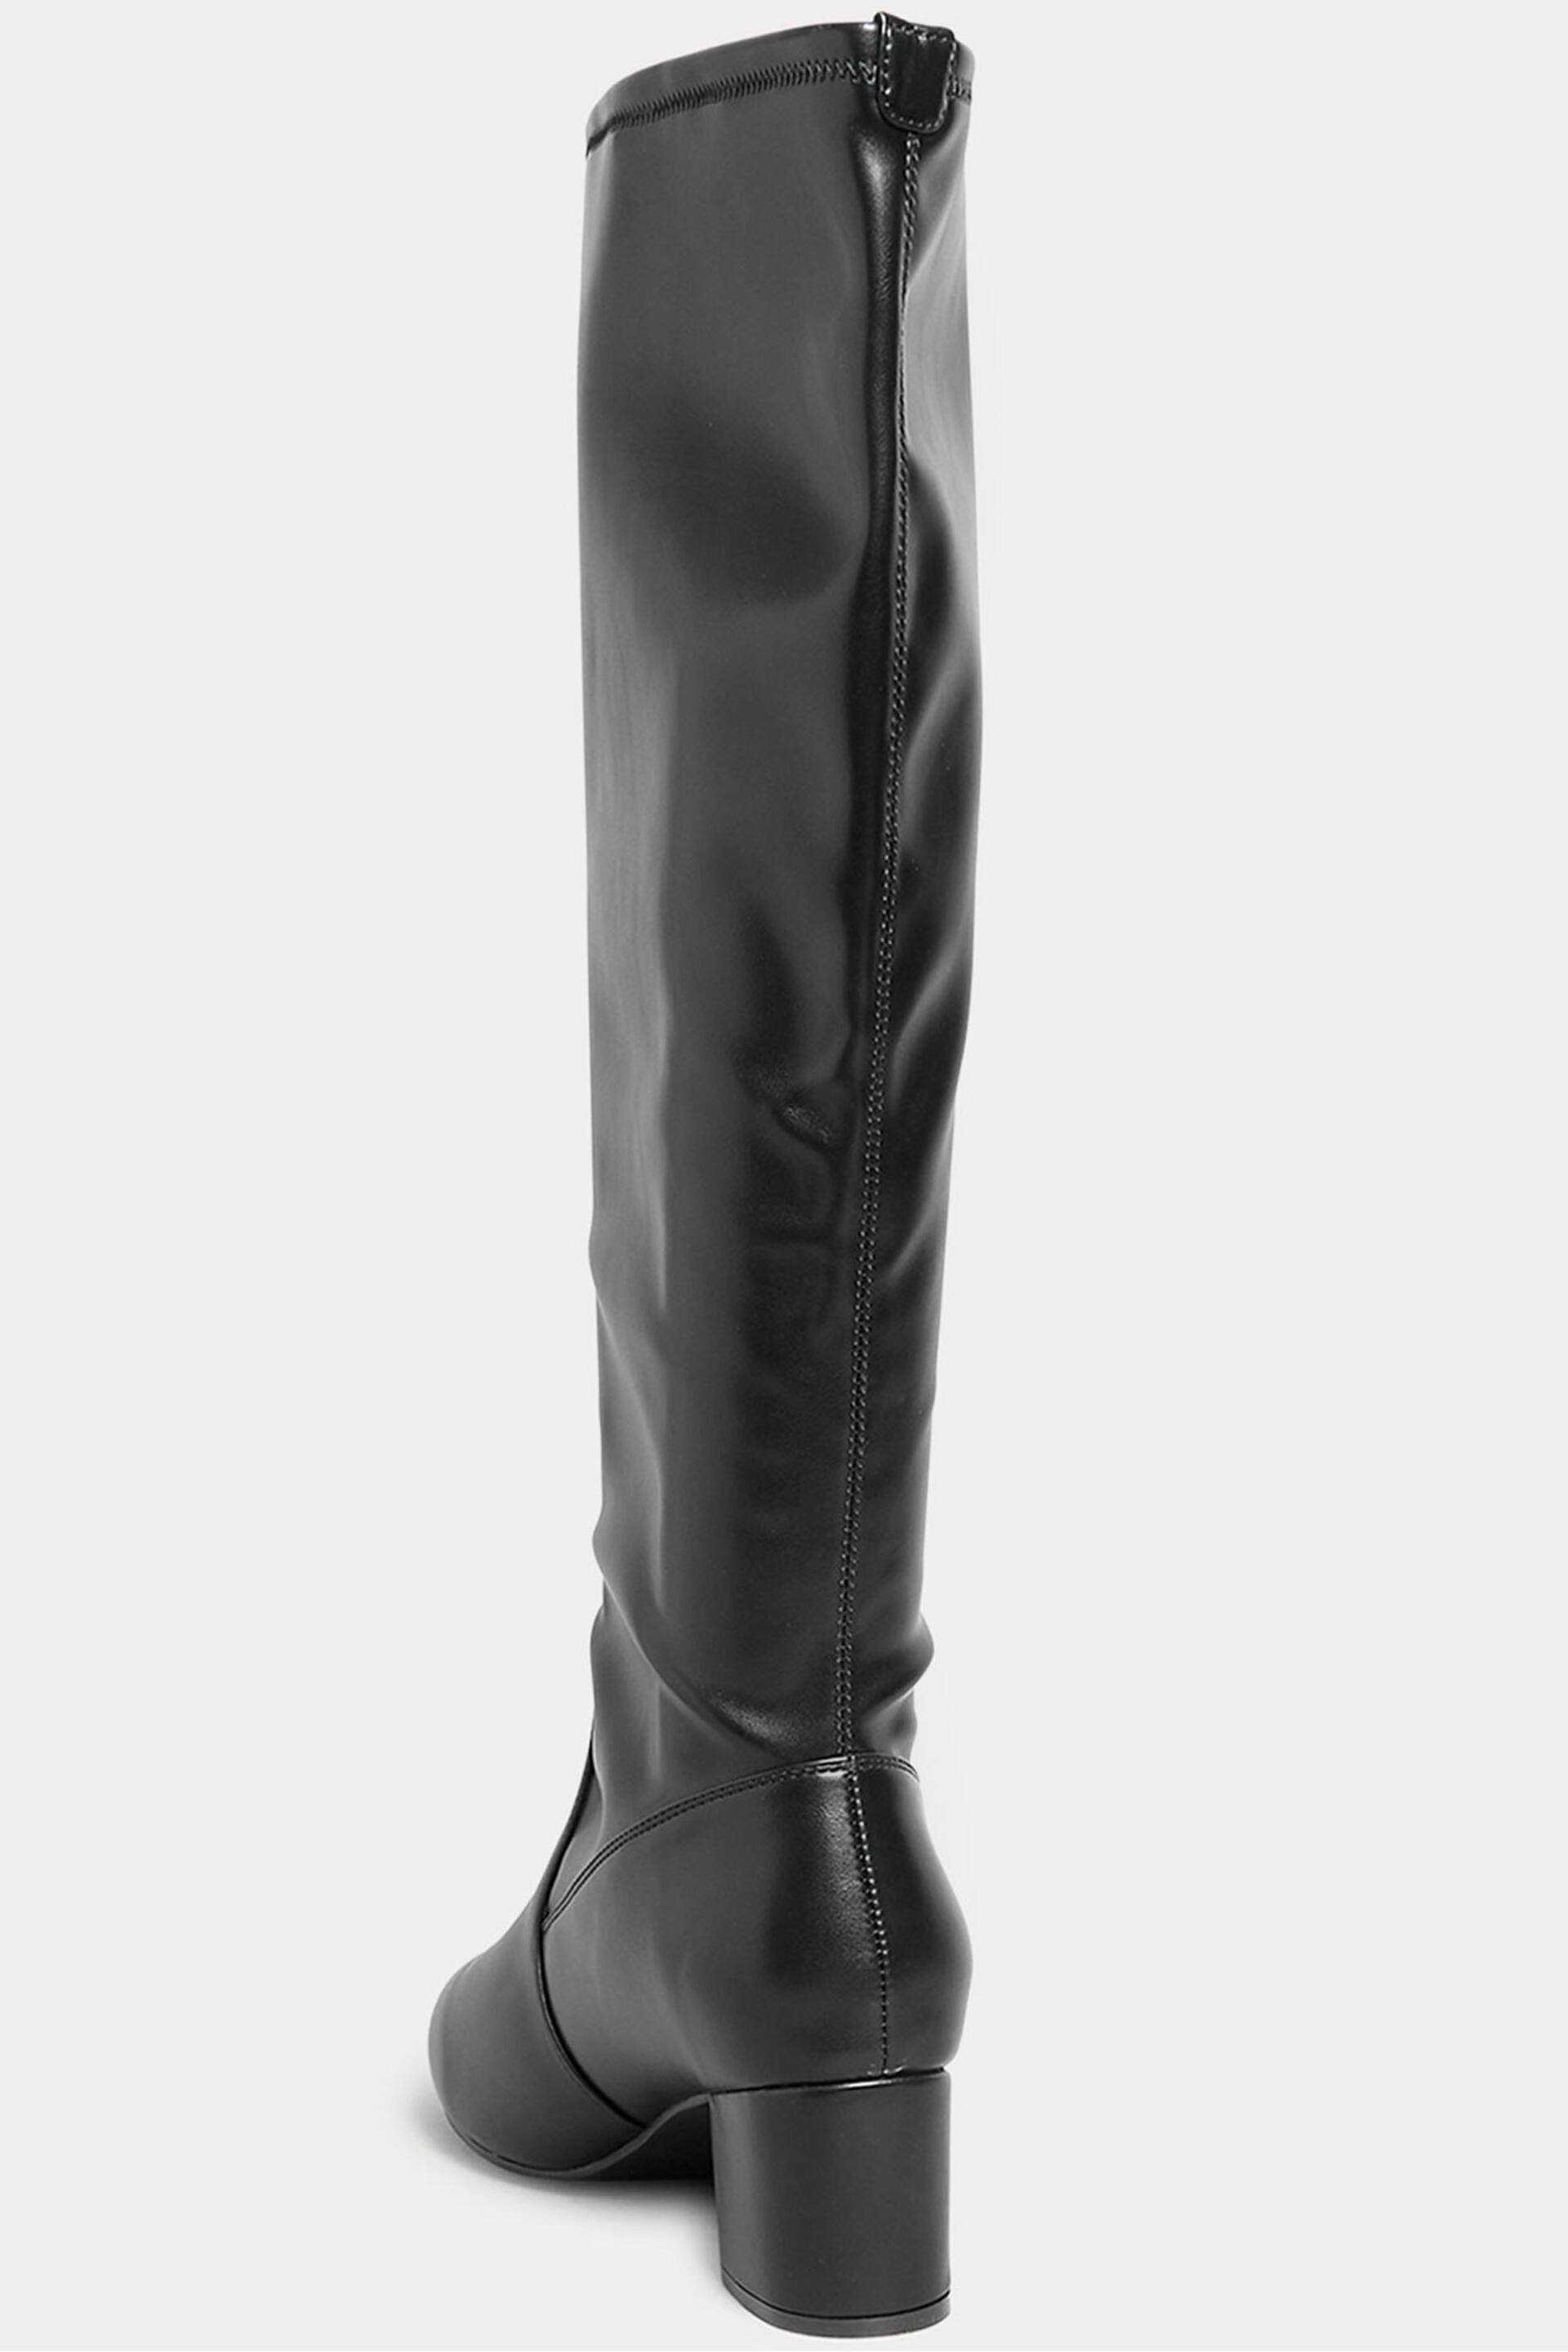 Yours Curve Black Wide Fit Stretch Knee High PU Boots - Image 2 of 5